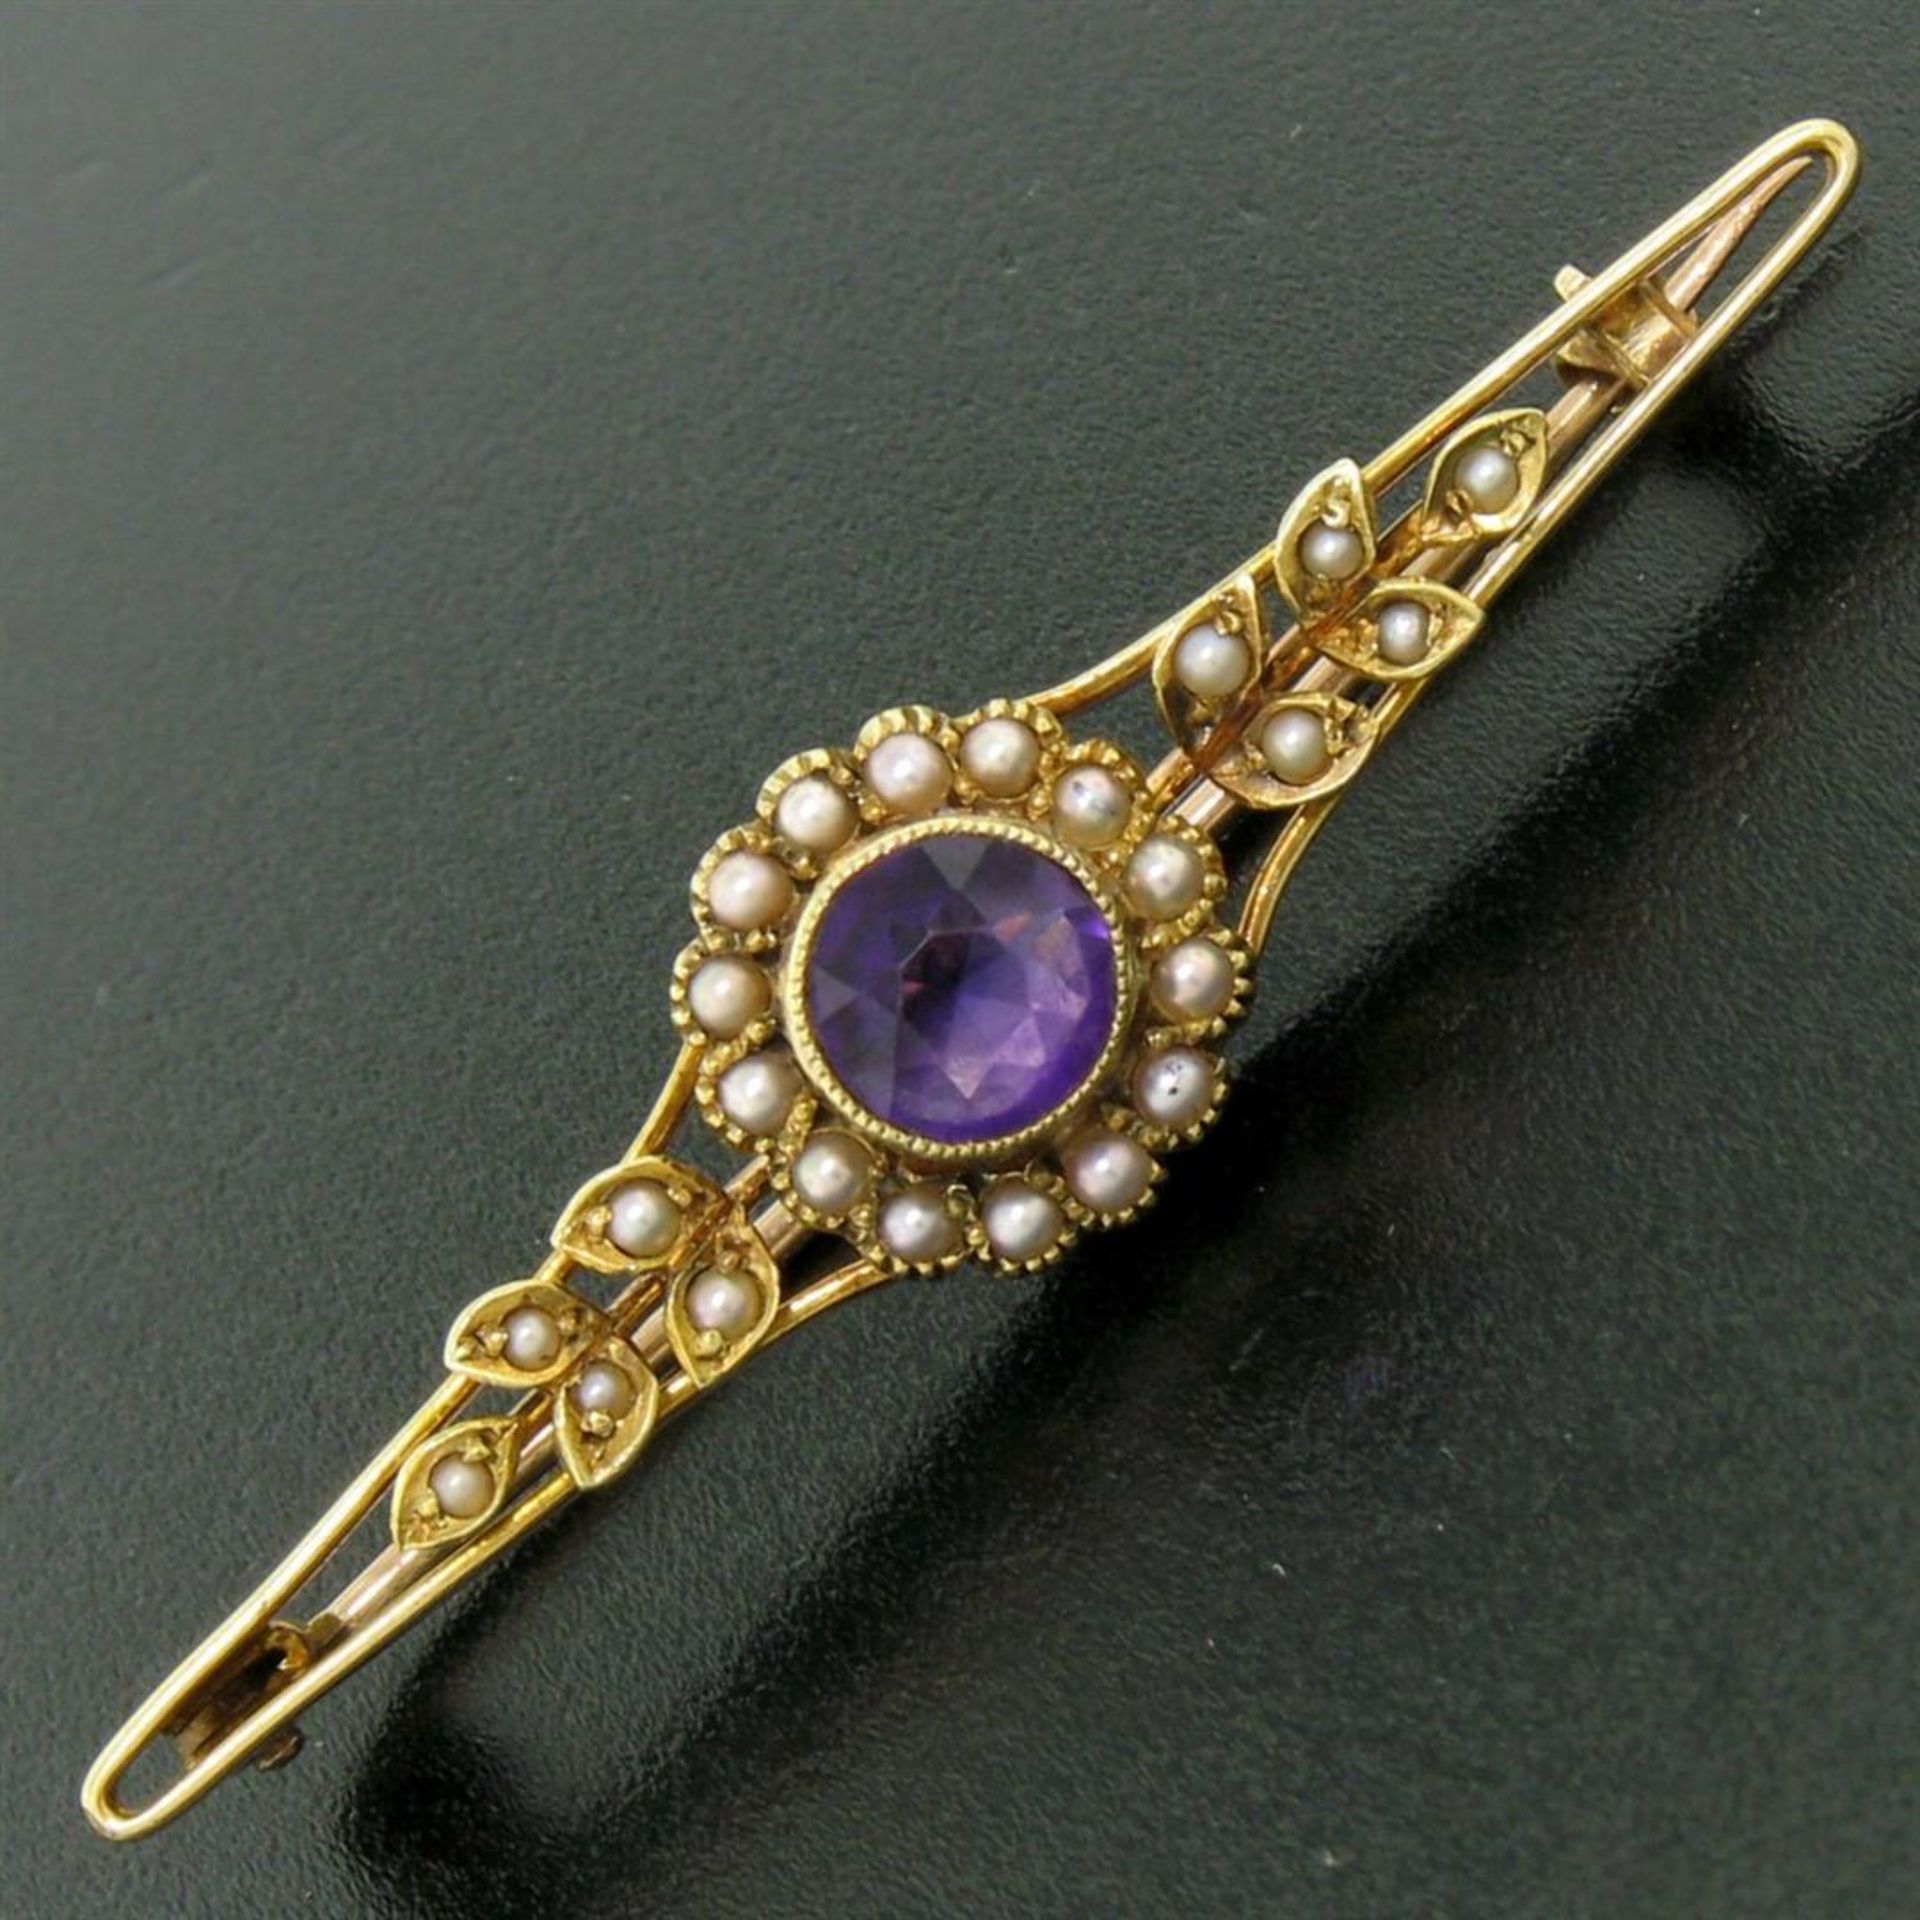 15k Yellow Gold .64 ct Old Cut Amethyst & Seed Pearl Brooch Pin - Image 2 of 8